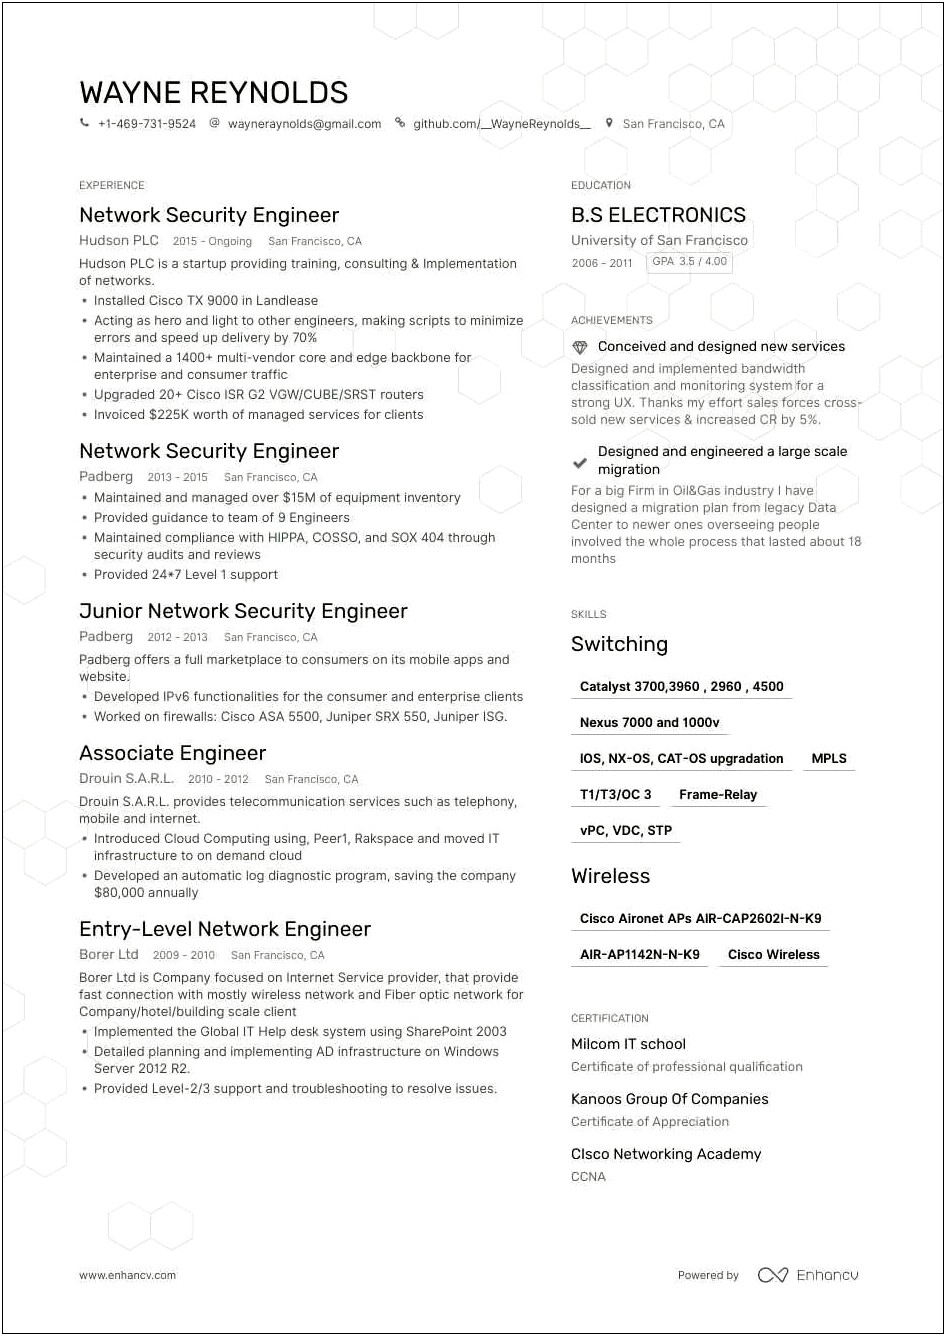 Resume Objective For Computer Networking